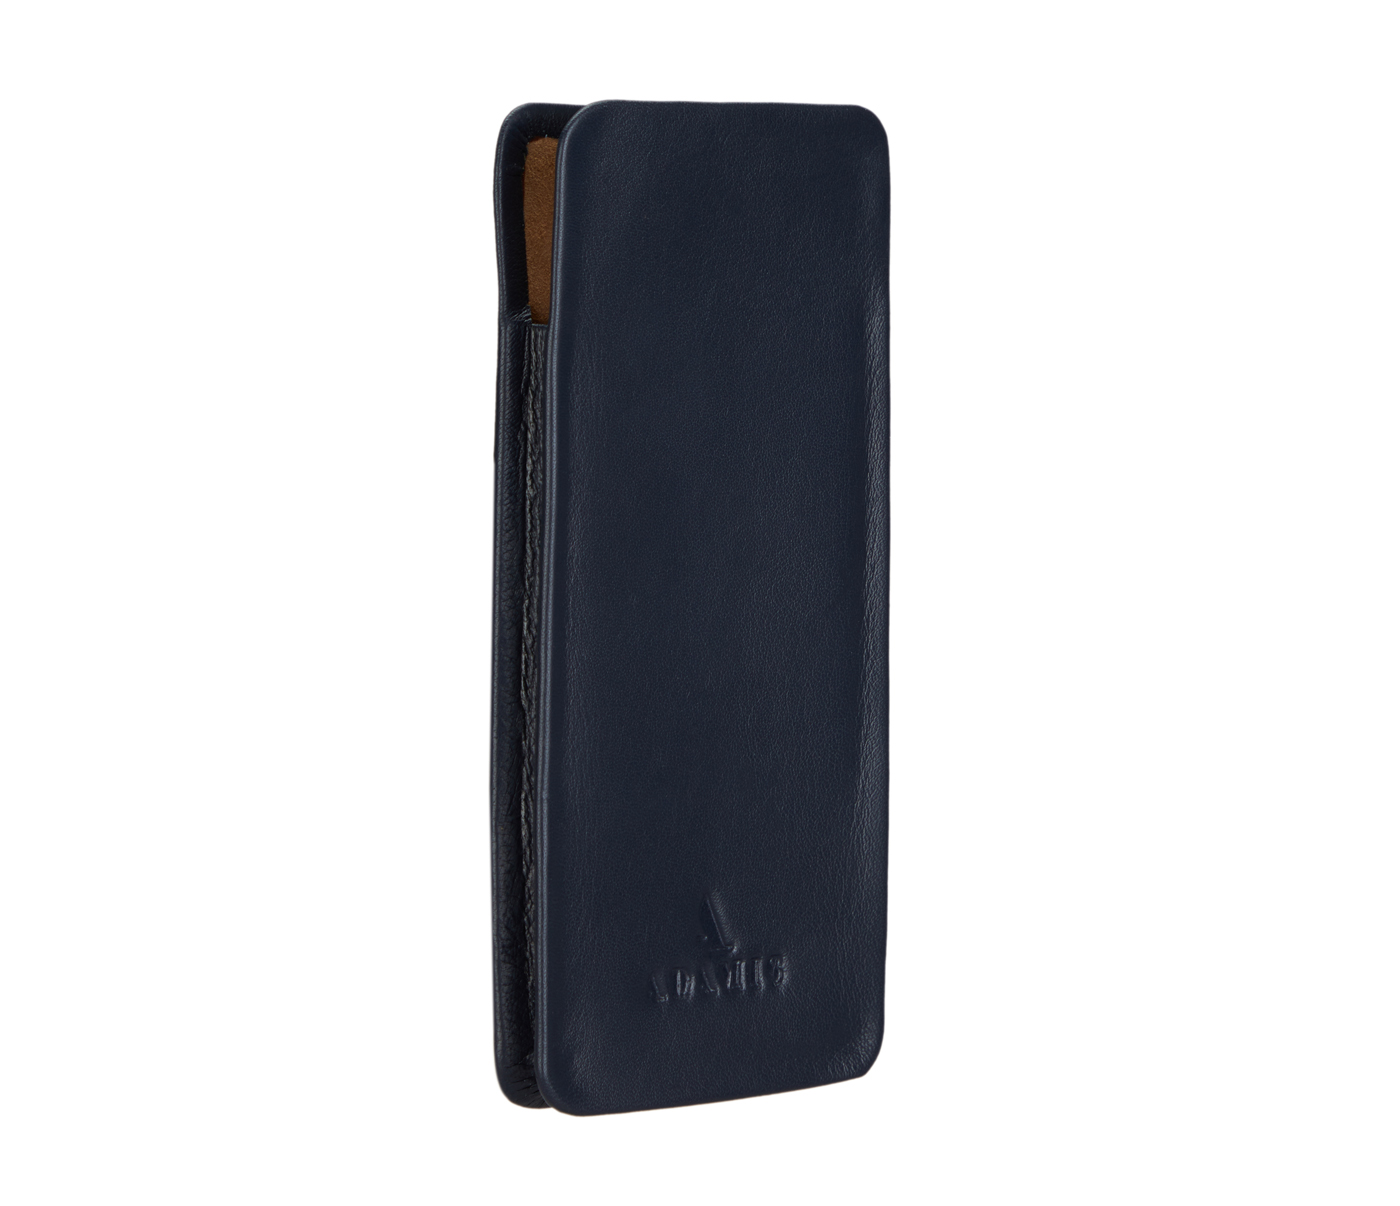 VW11--Soft stitch free spectacle case in Genuine Leather - Blue